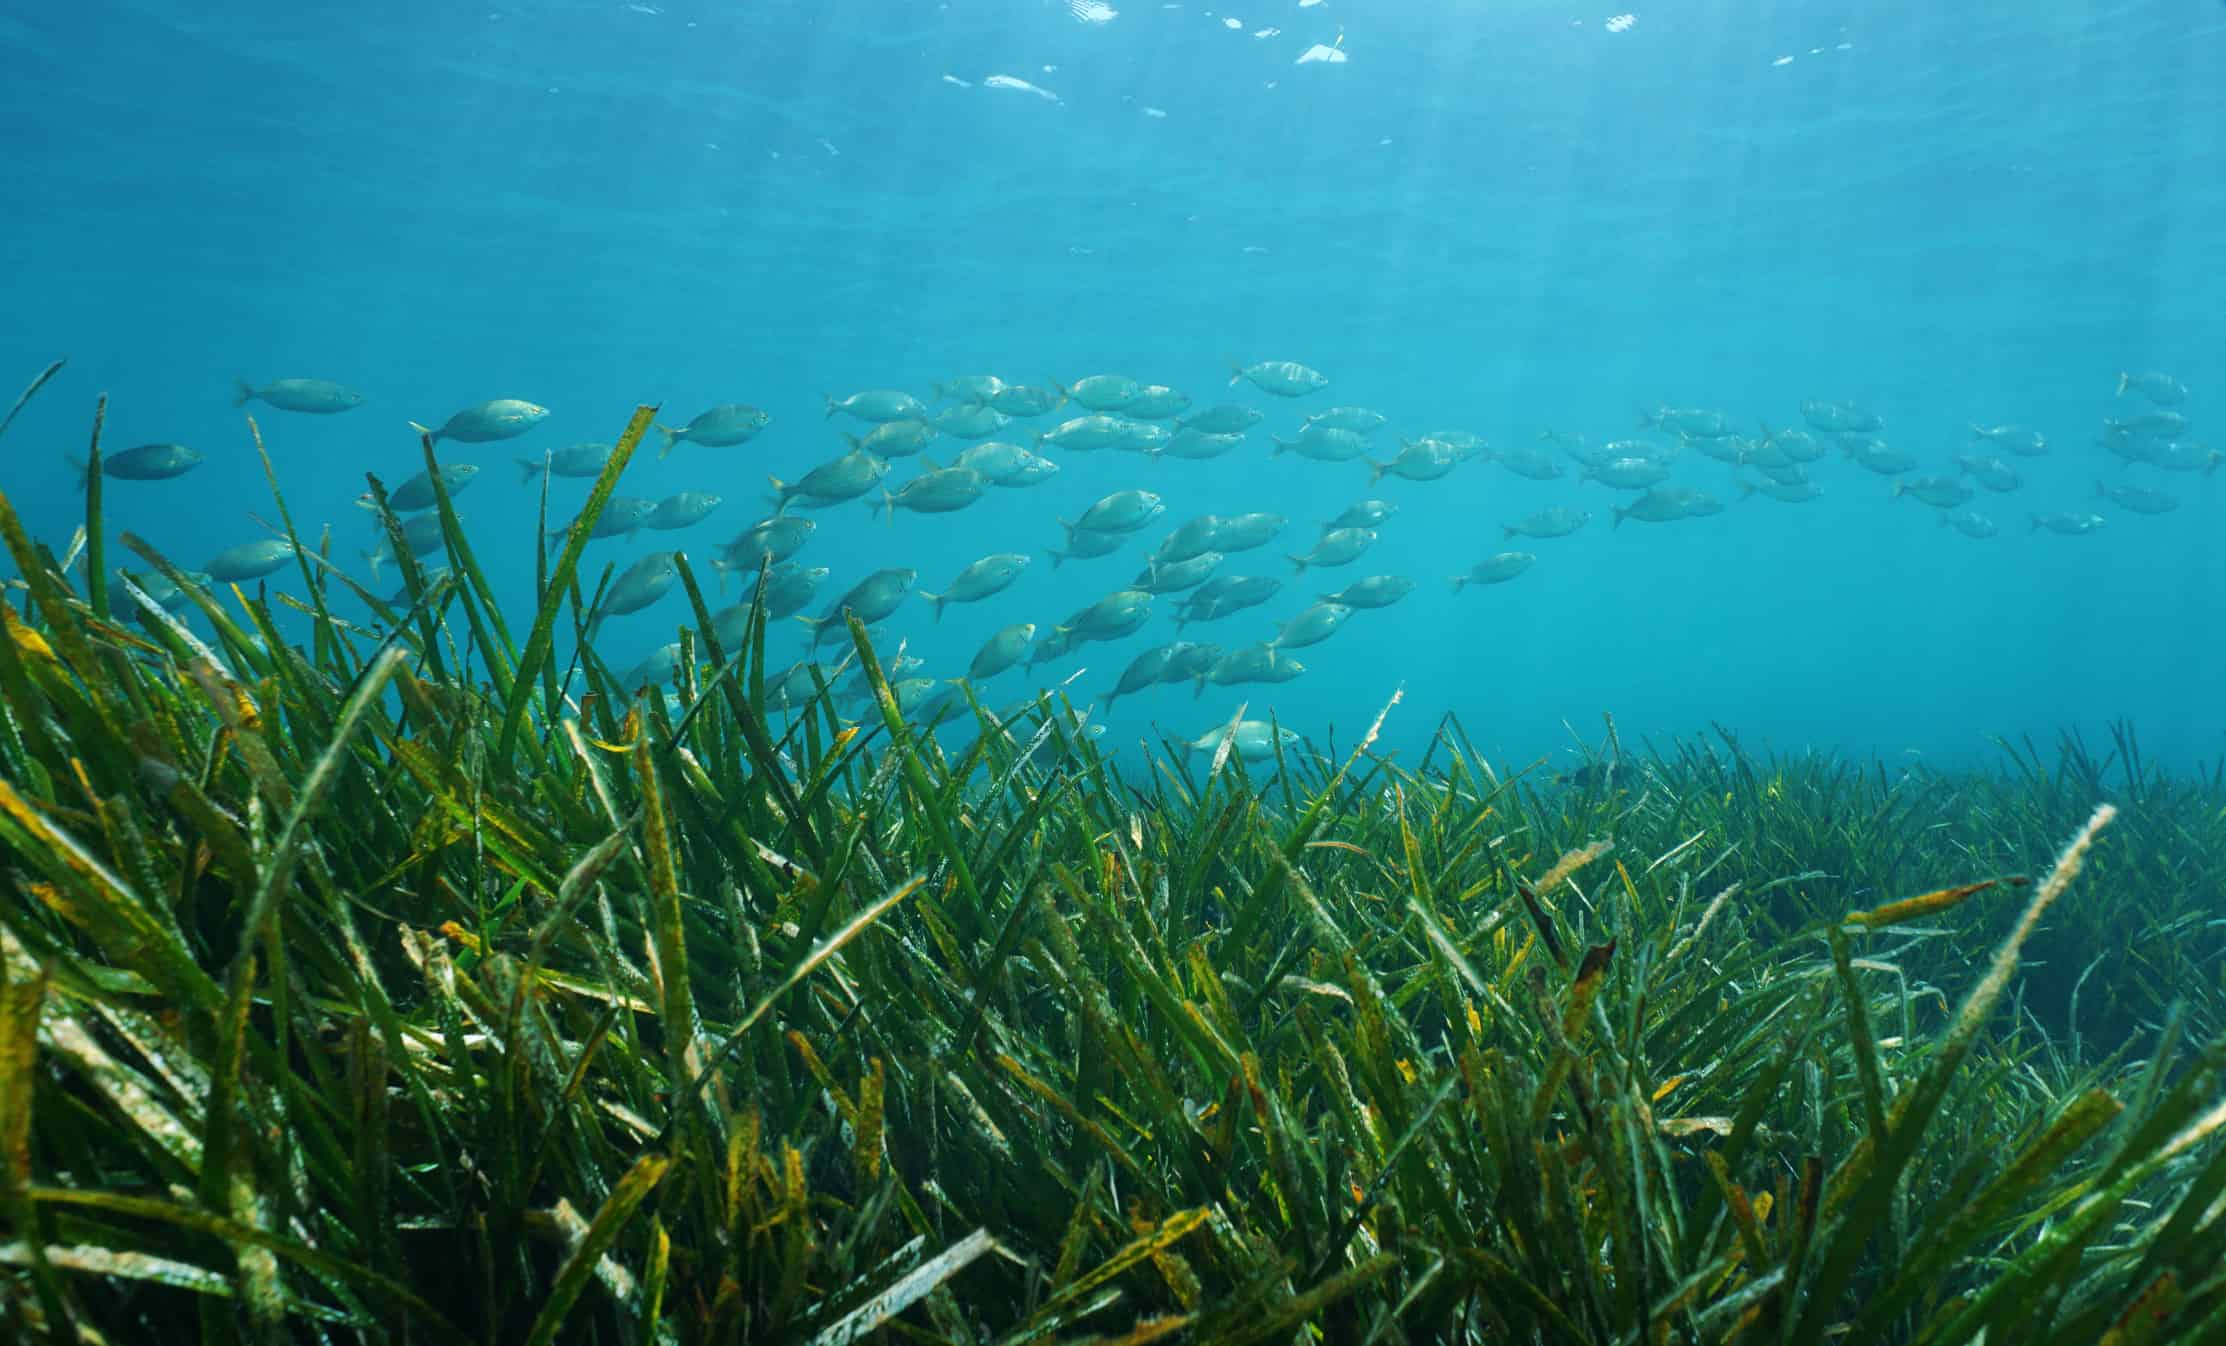 Posidonia oceanica seagrass with school of fish